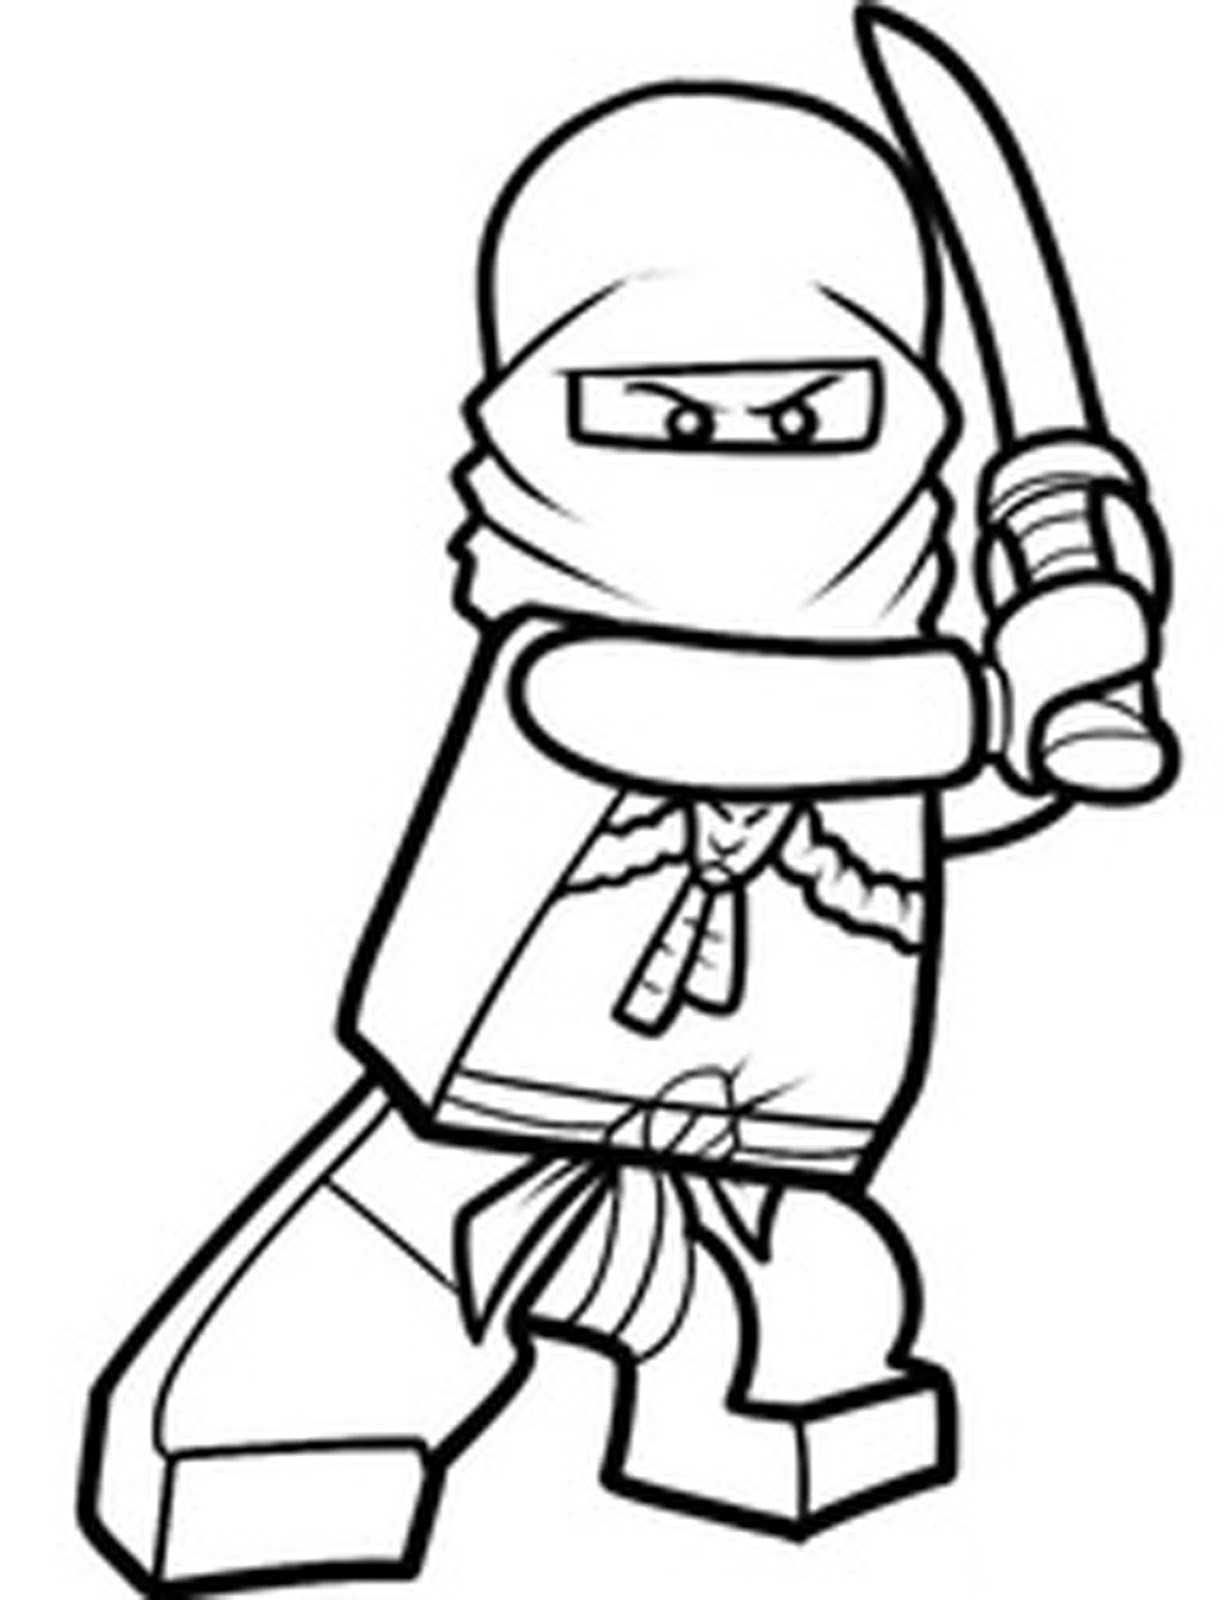 Coloring Pages For Boys Lego Ninjago
 T shirt logo design creative ideas Coloring Pages For Kids